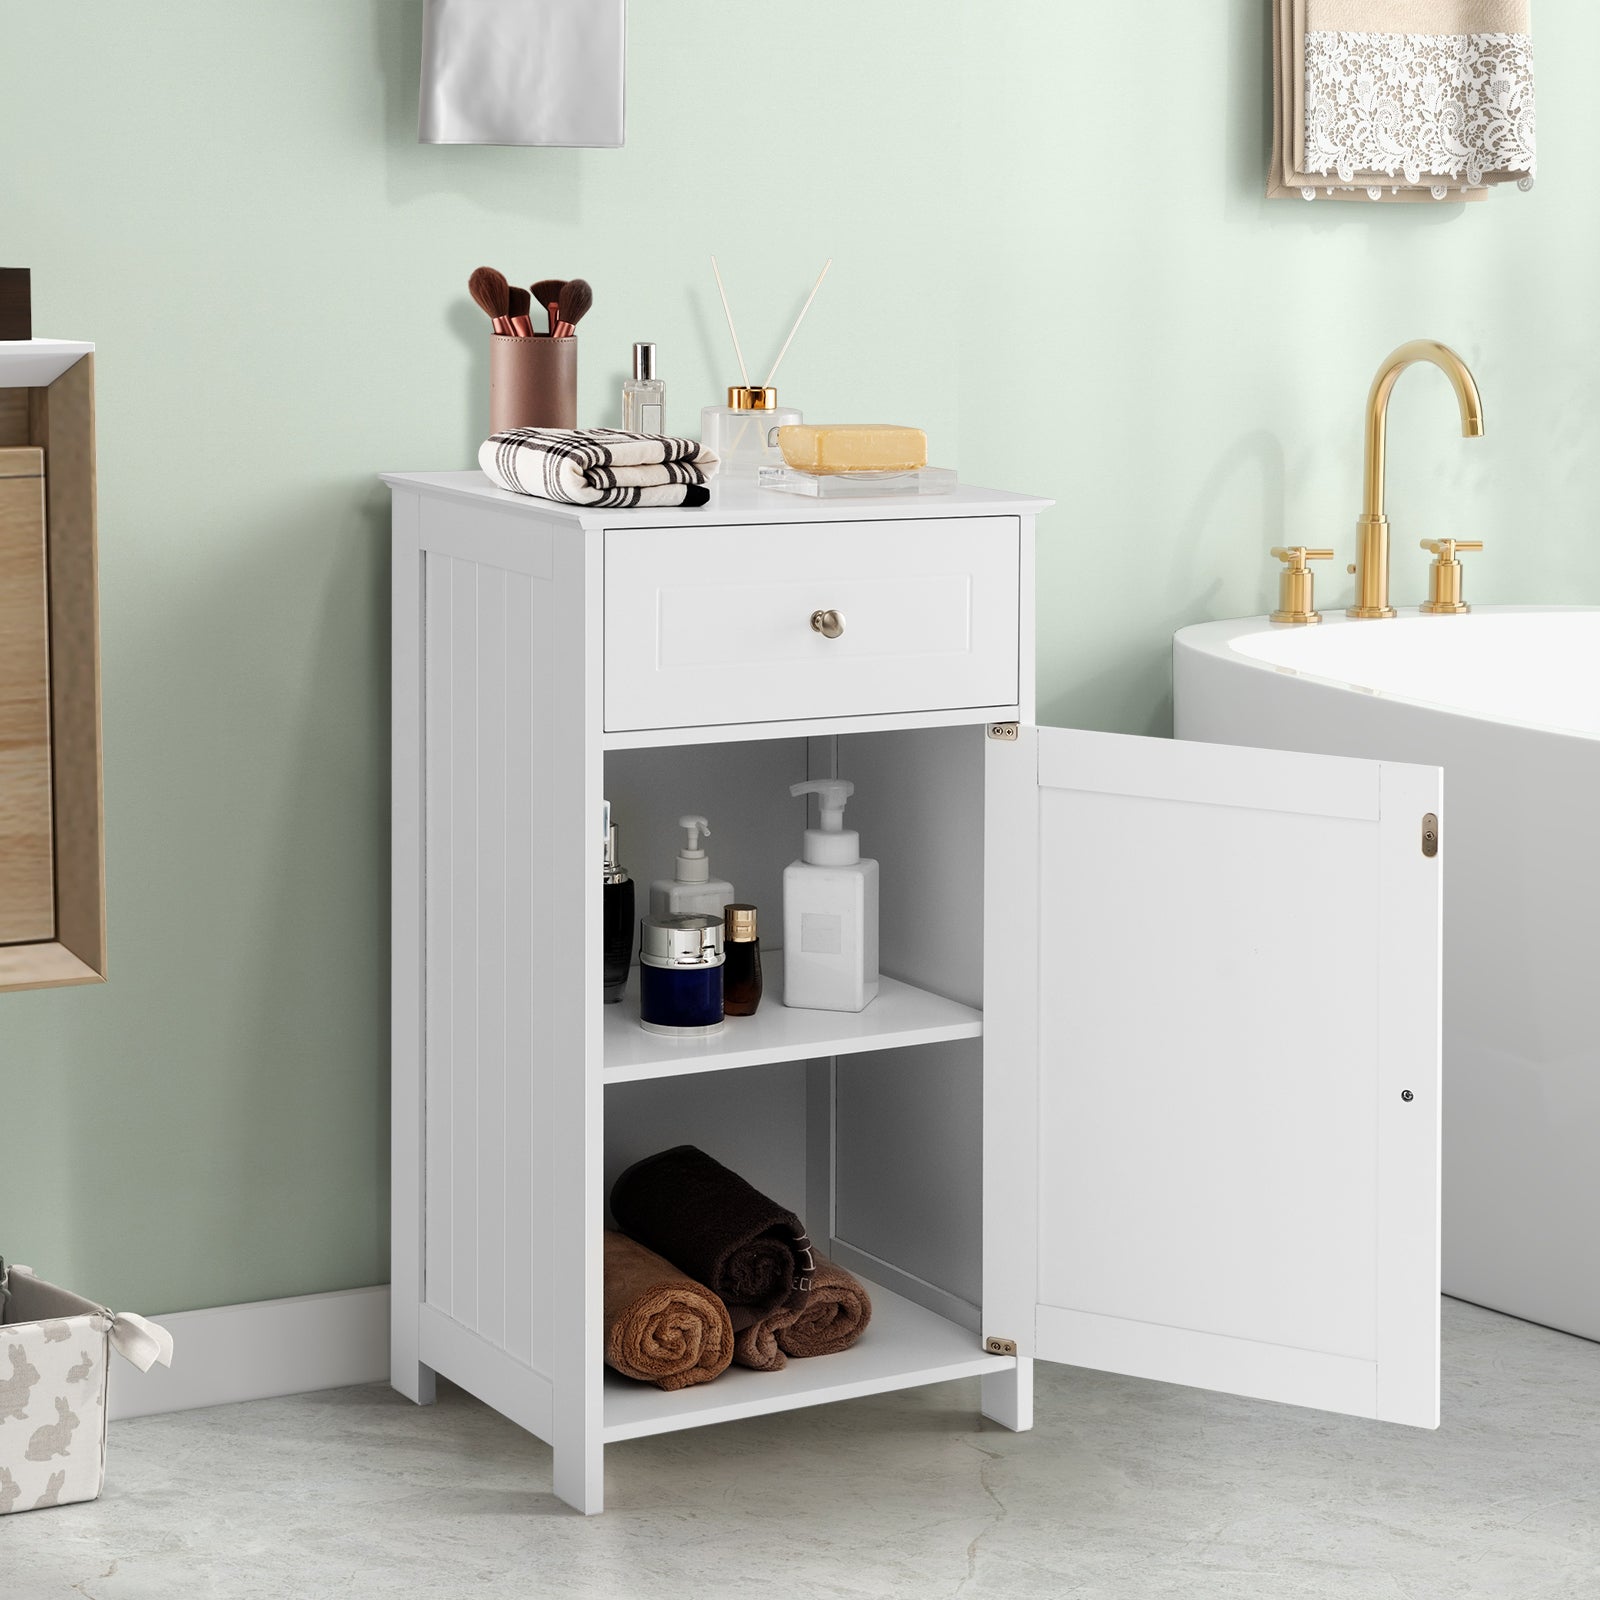 Bathroom Cabinet Floor Organizer with Single Door and Drawer-White